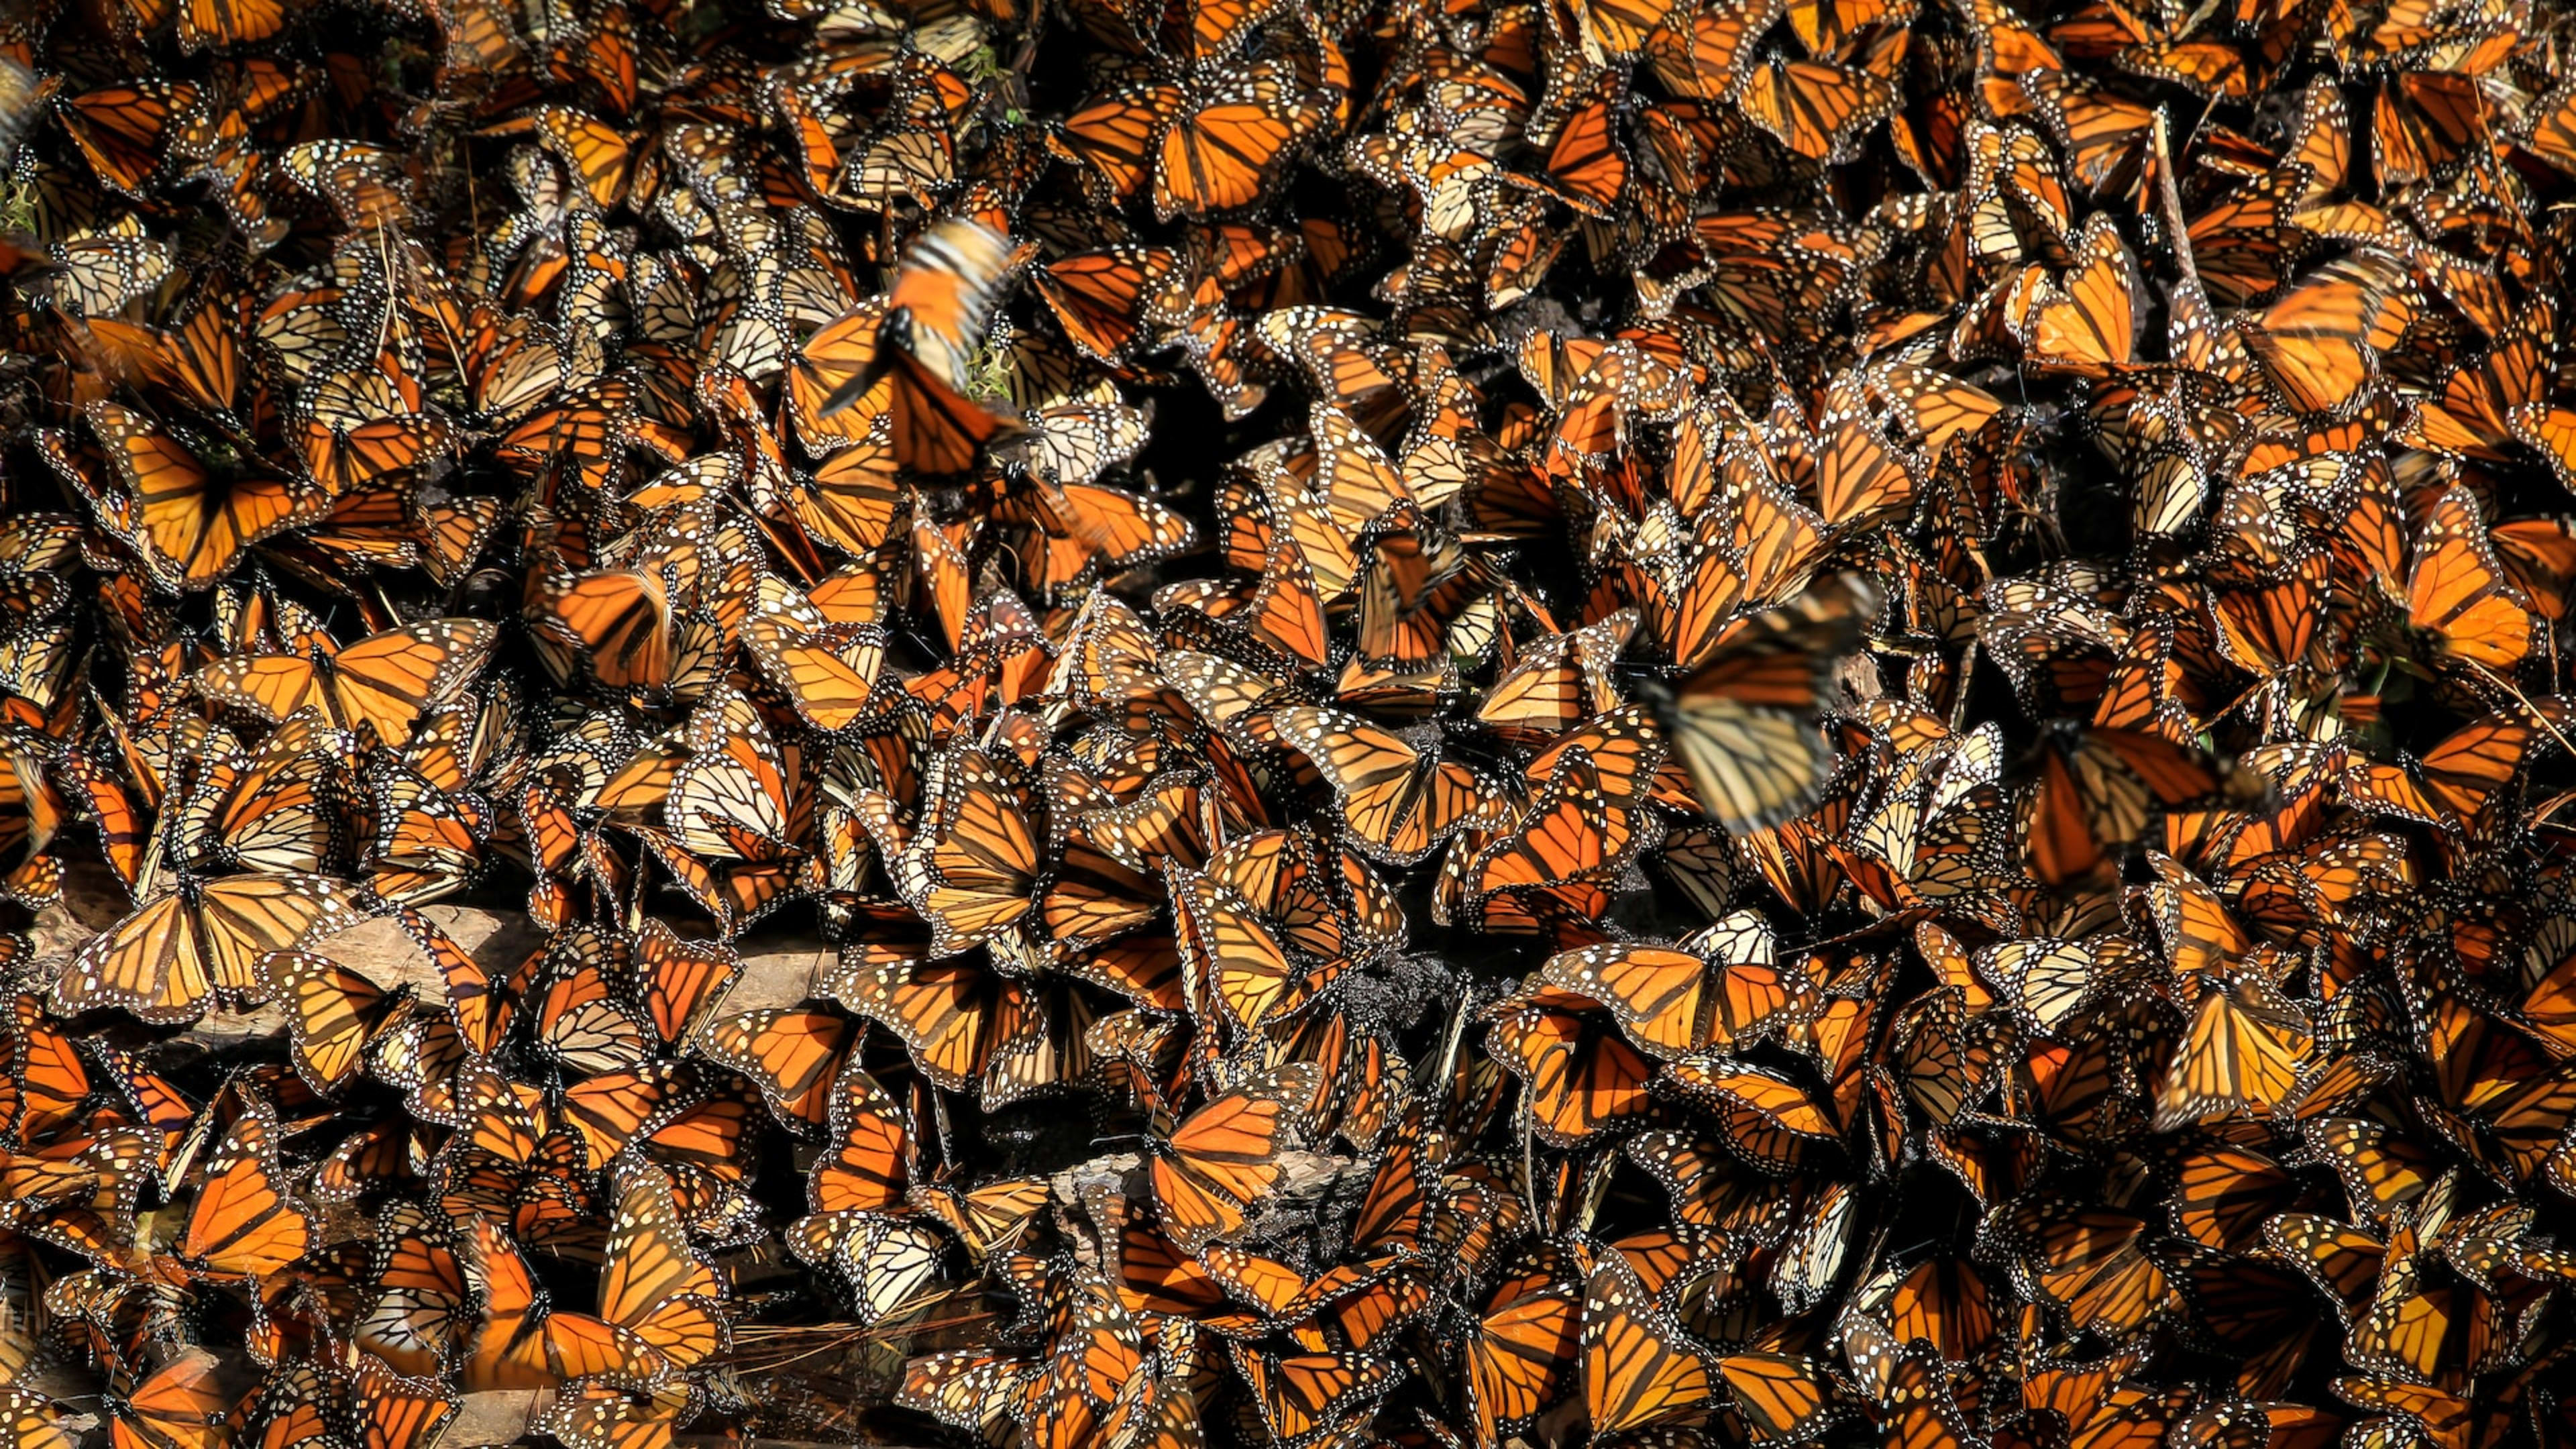 Introducing Project Monarch: A Letter from Hipcamp Ecologist Charles Post